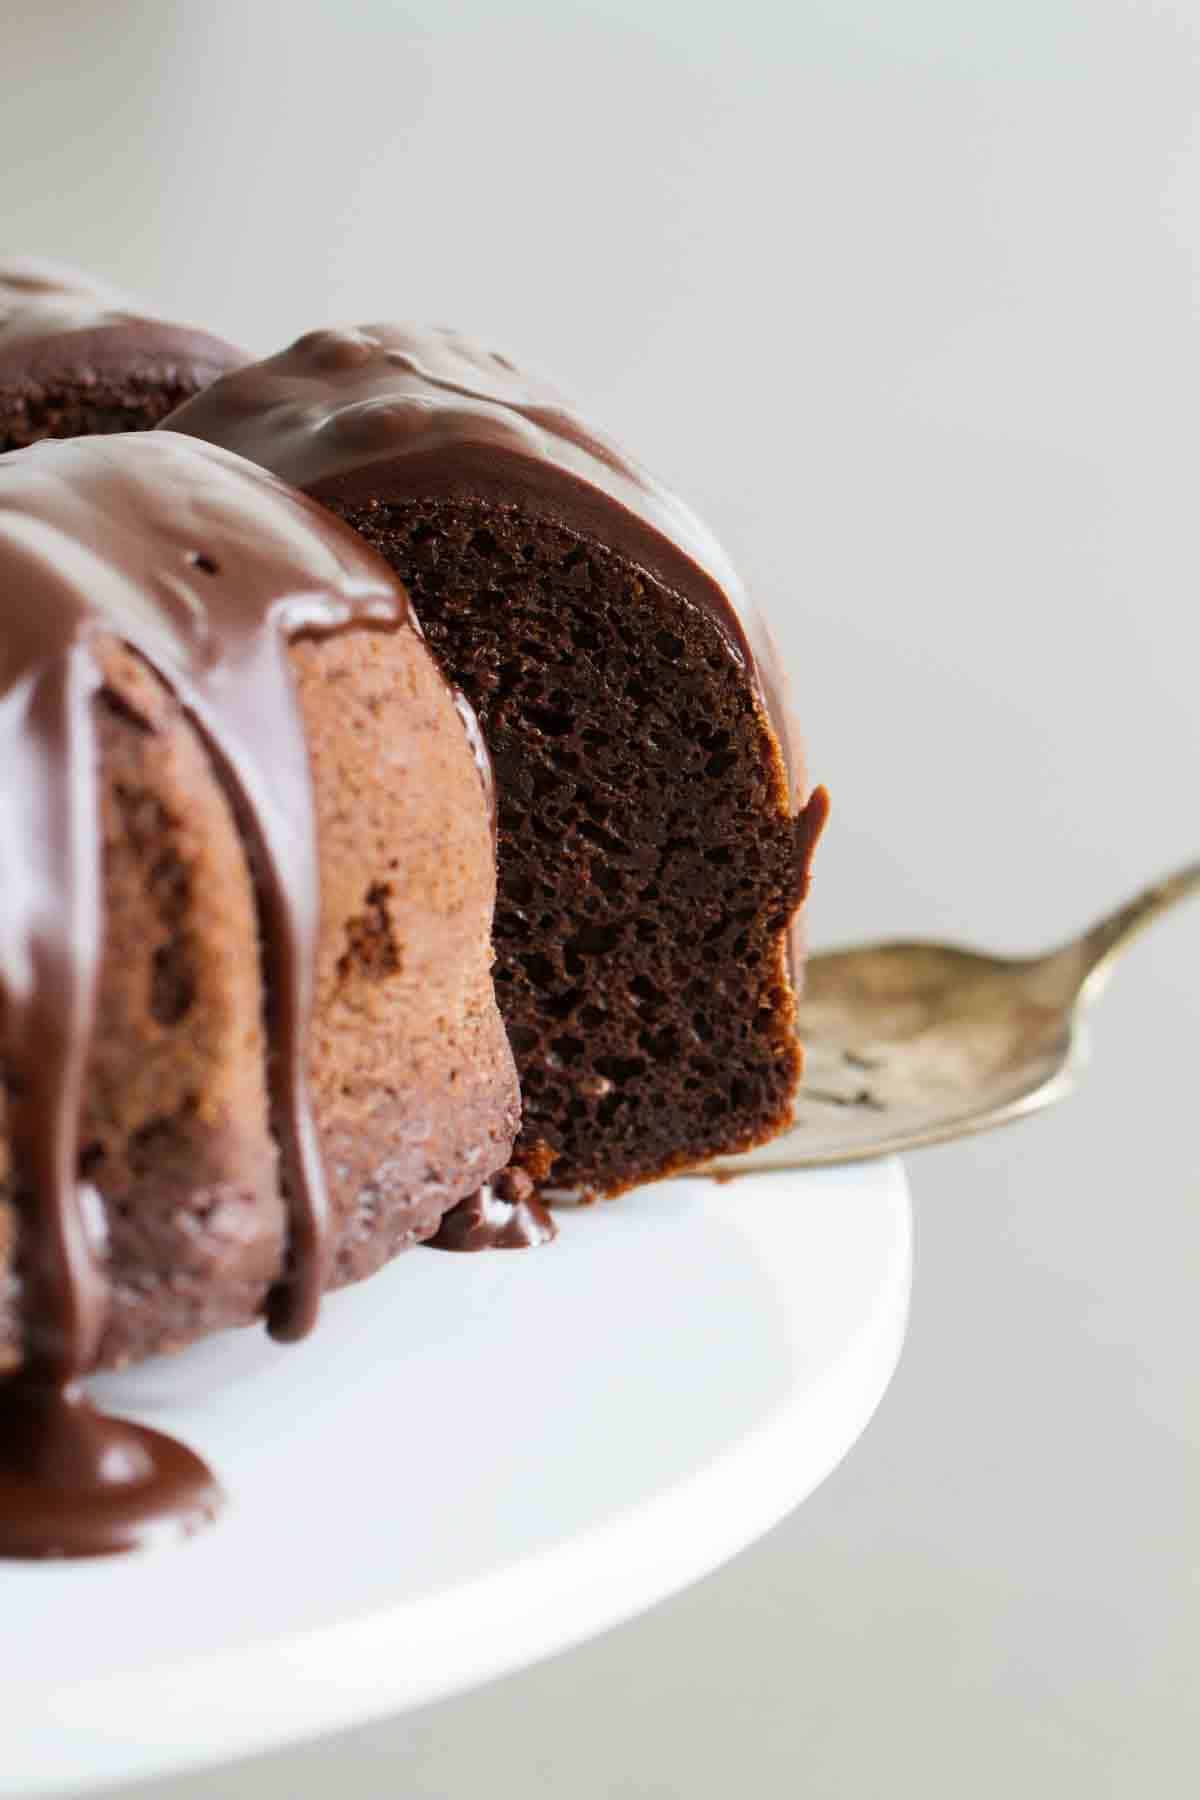 Removing a slice of chocolate bundt cake from the whole cake.